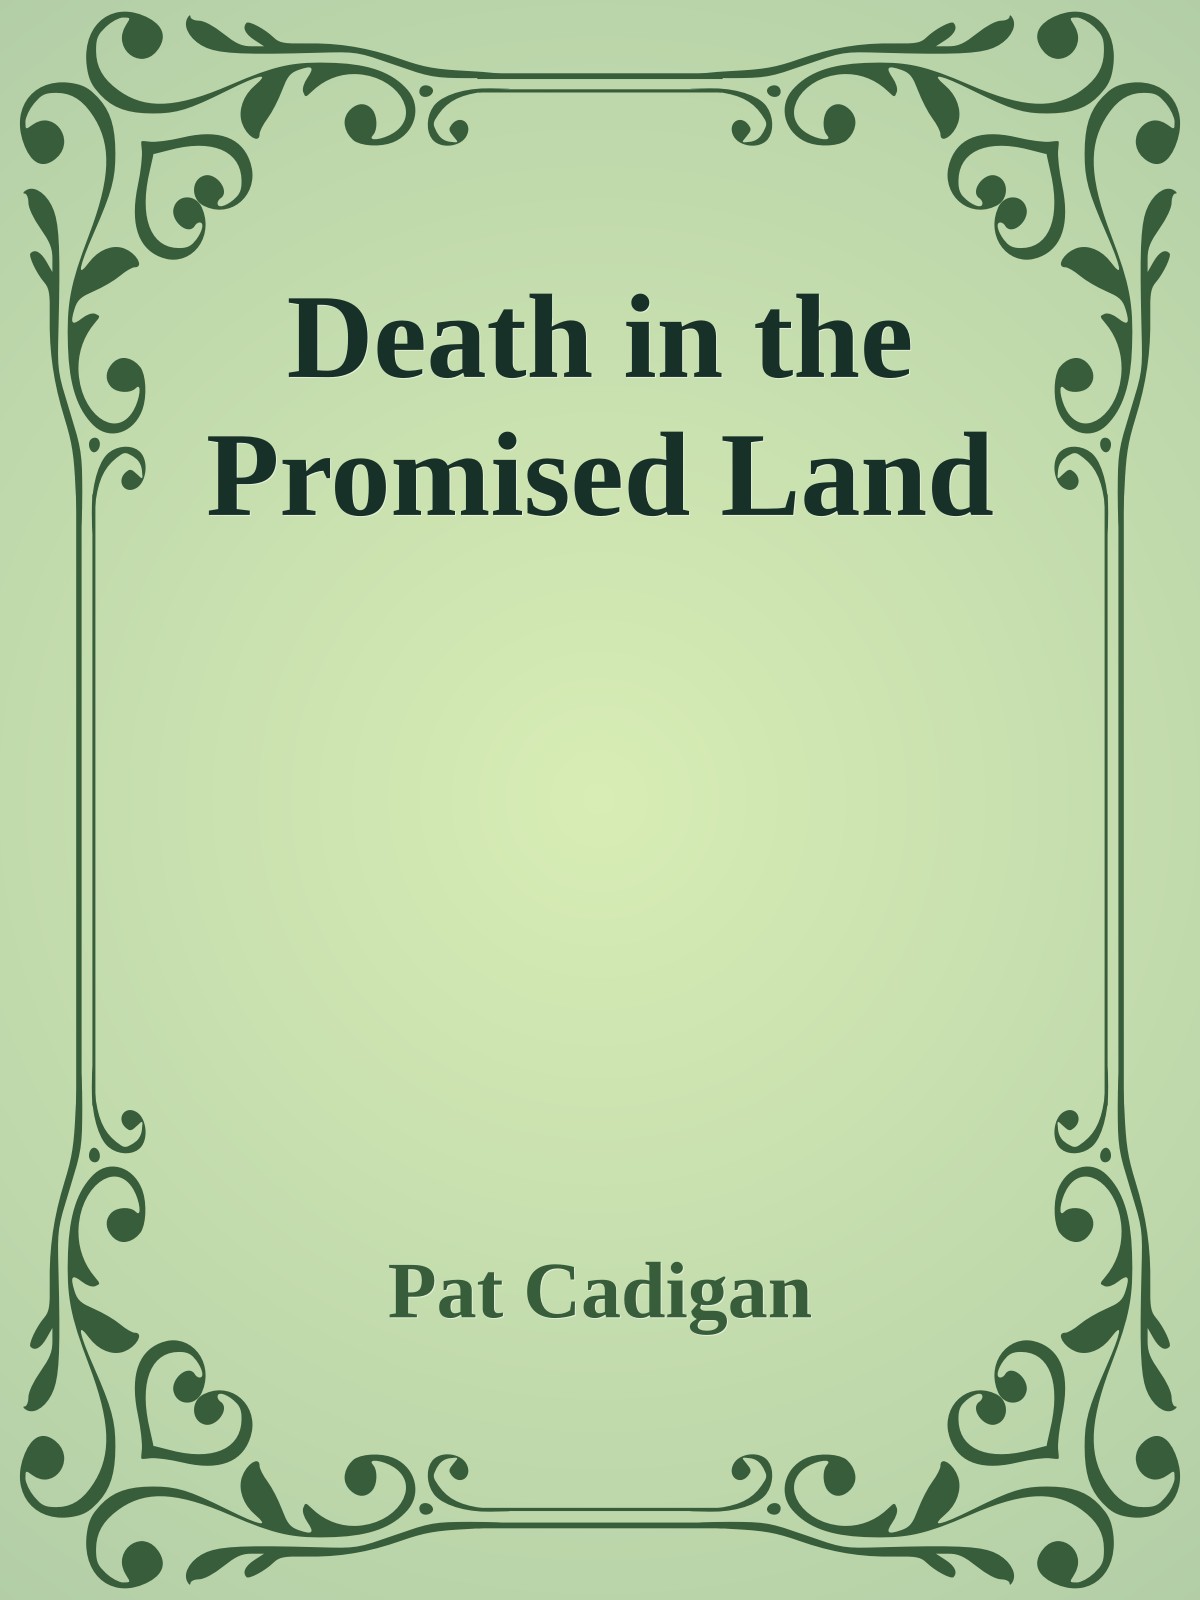 Death in the Promised Land